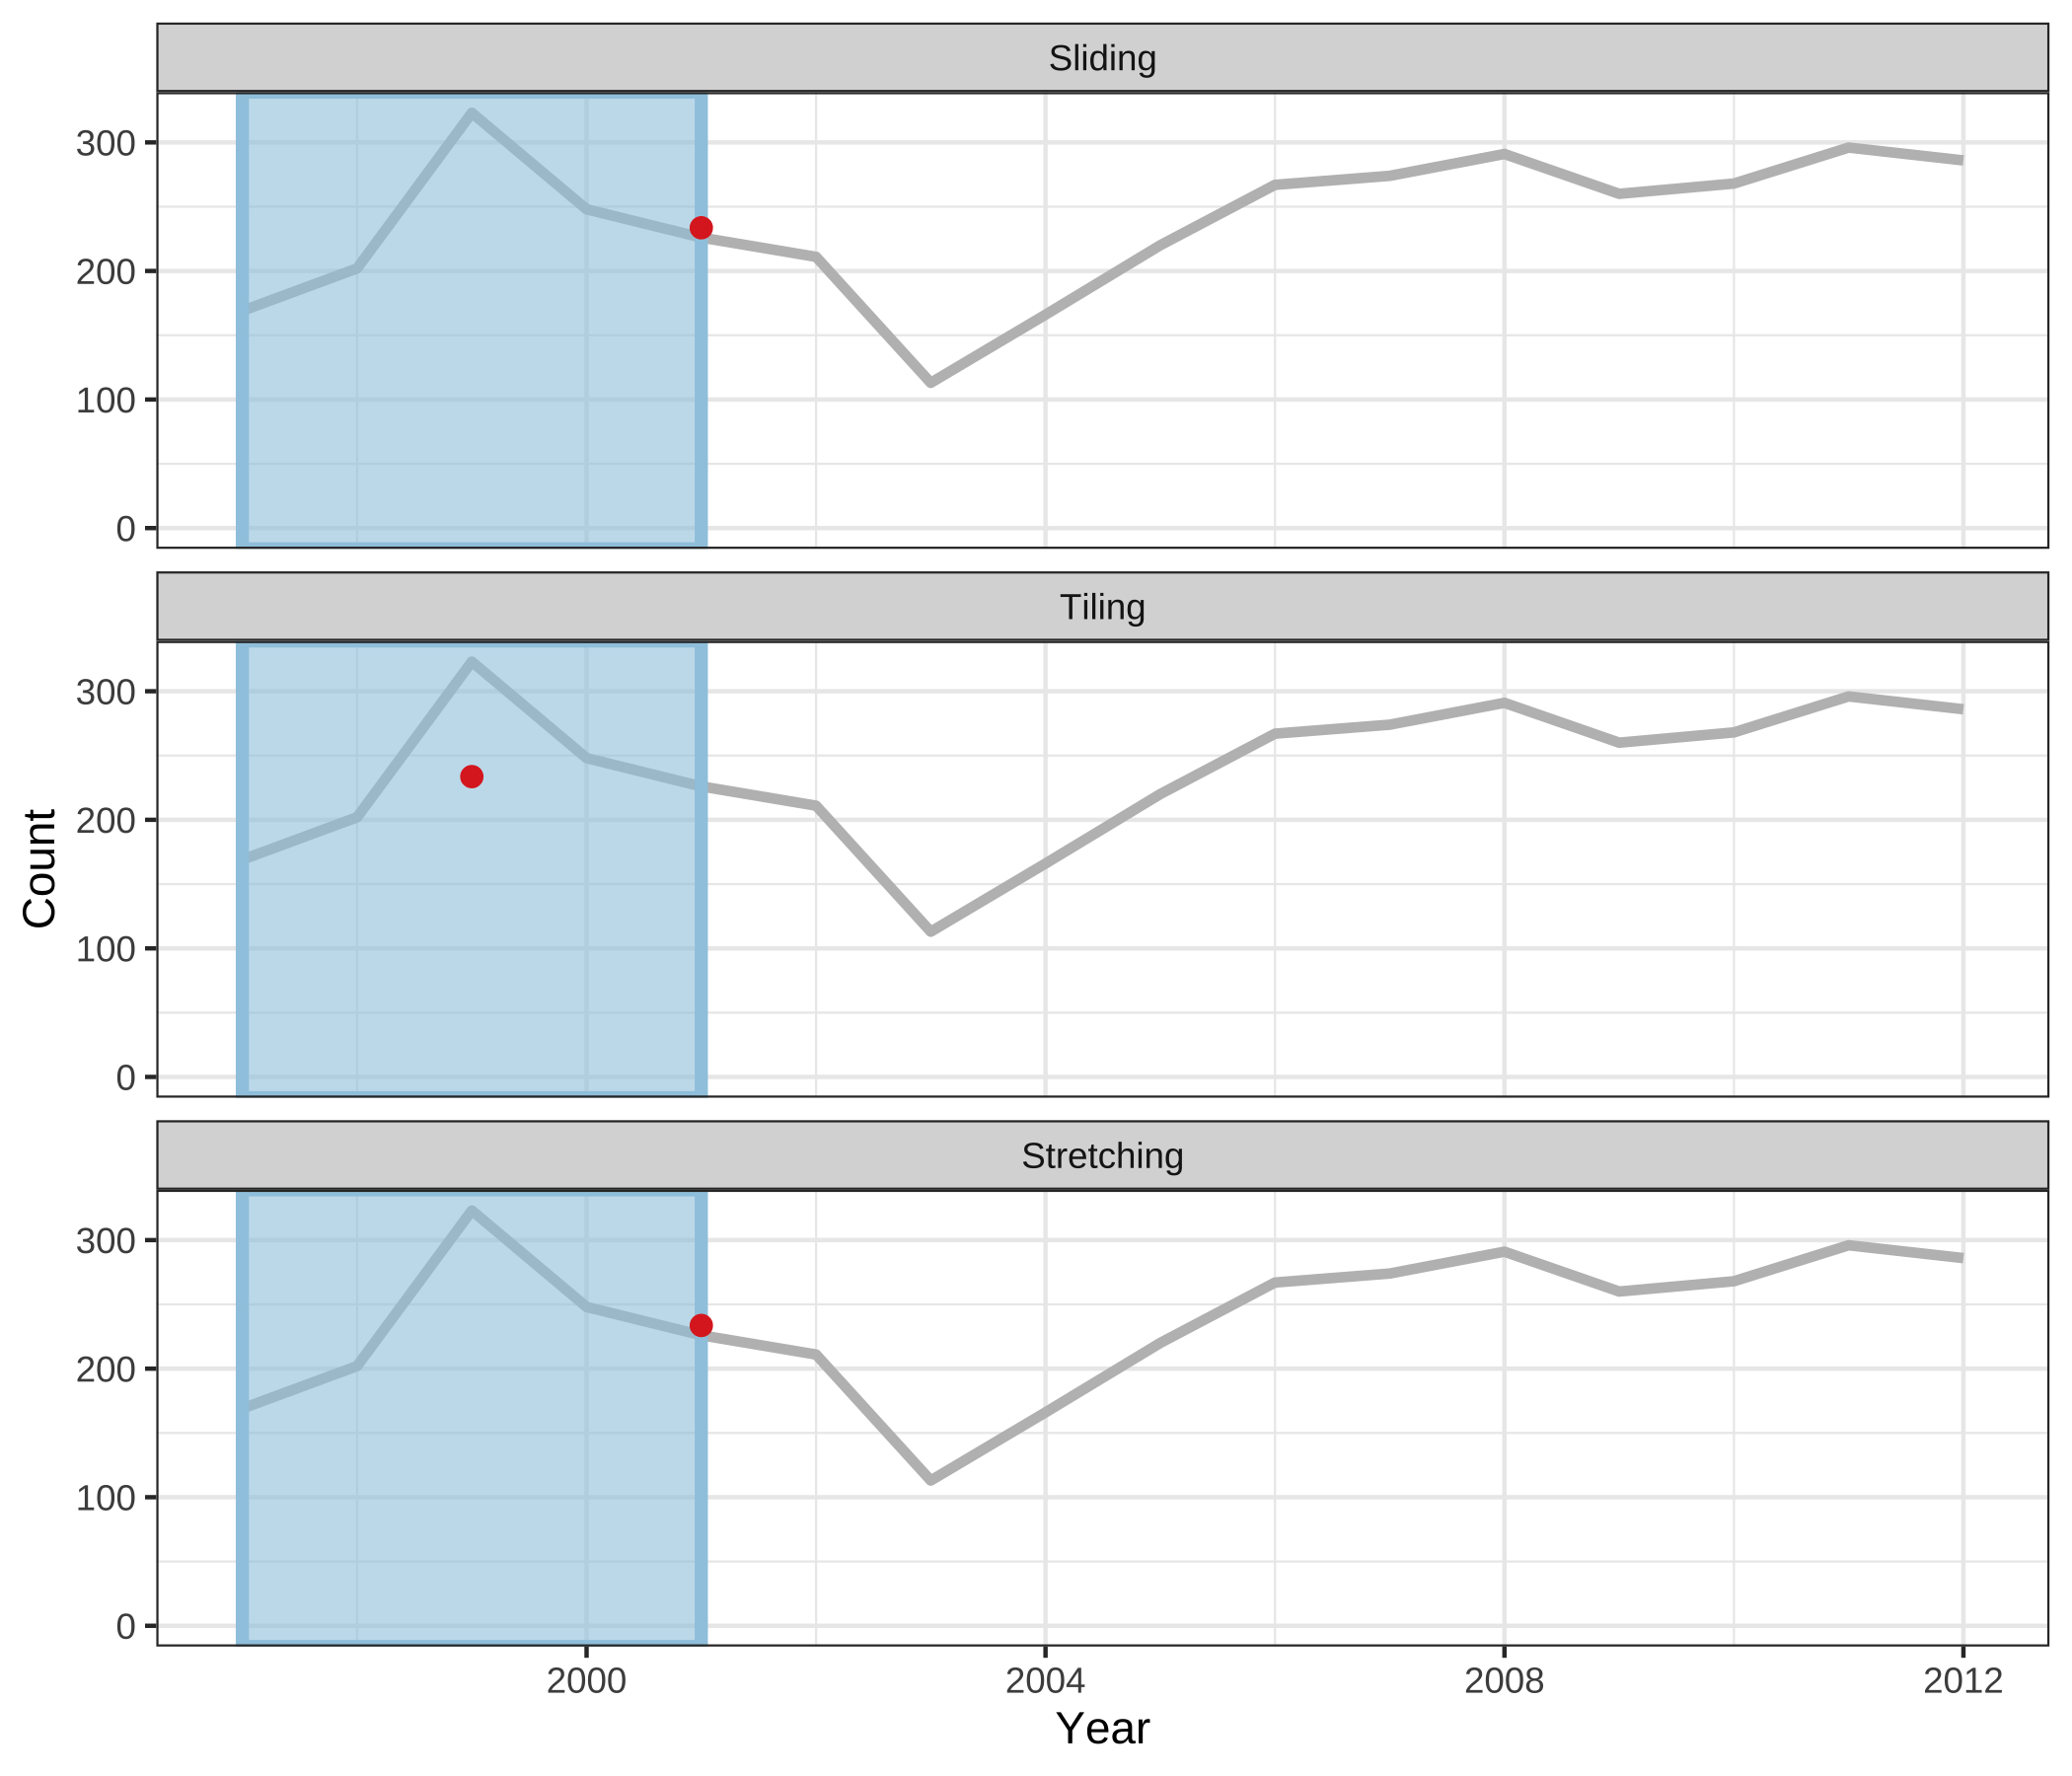 An illustration of a window of size 5 to compute rolling averages over annual tuberculosis cases in Australia using sliding, tiling and stretching. The animations are available with the supplementary materials online, and can also be viewed directly at https://github.com/earowang/paper-tsibble/blob/master/img/animate-1.gif.